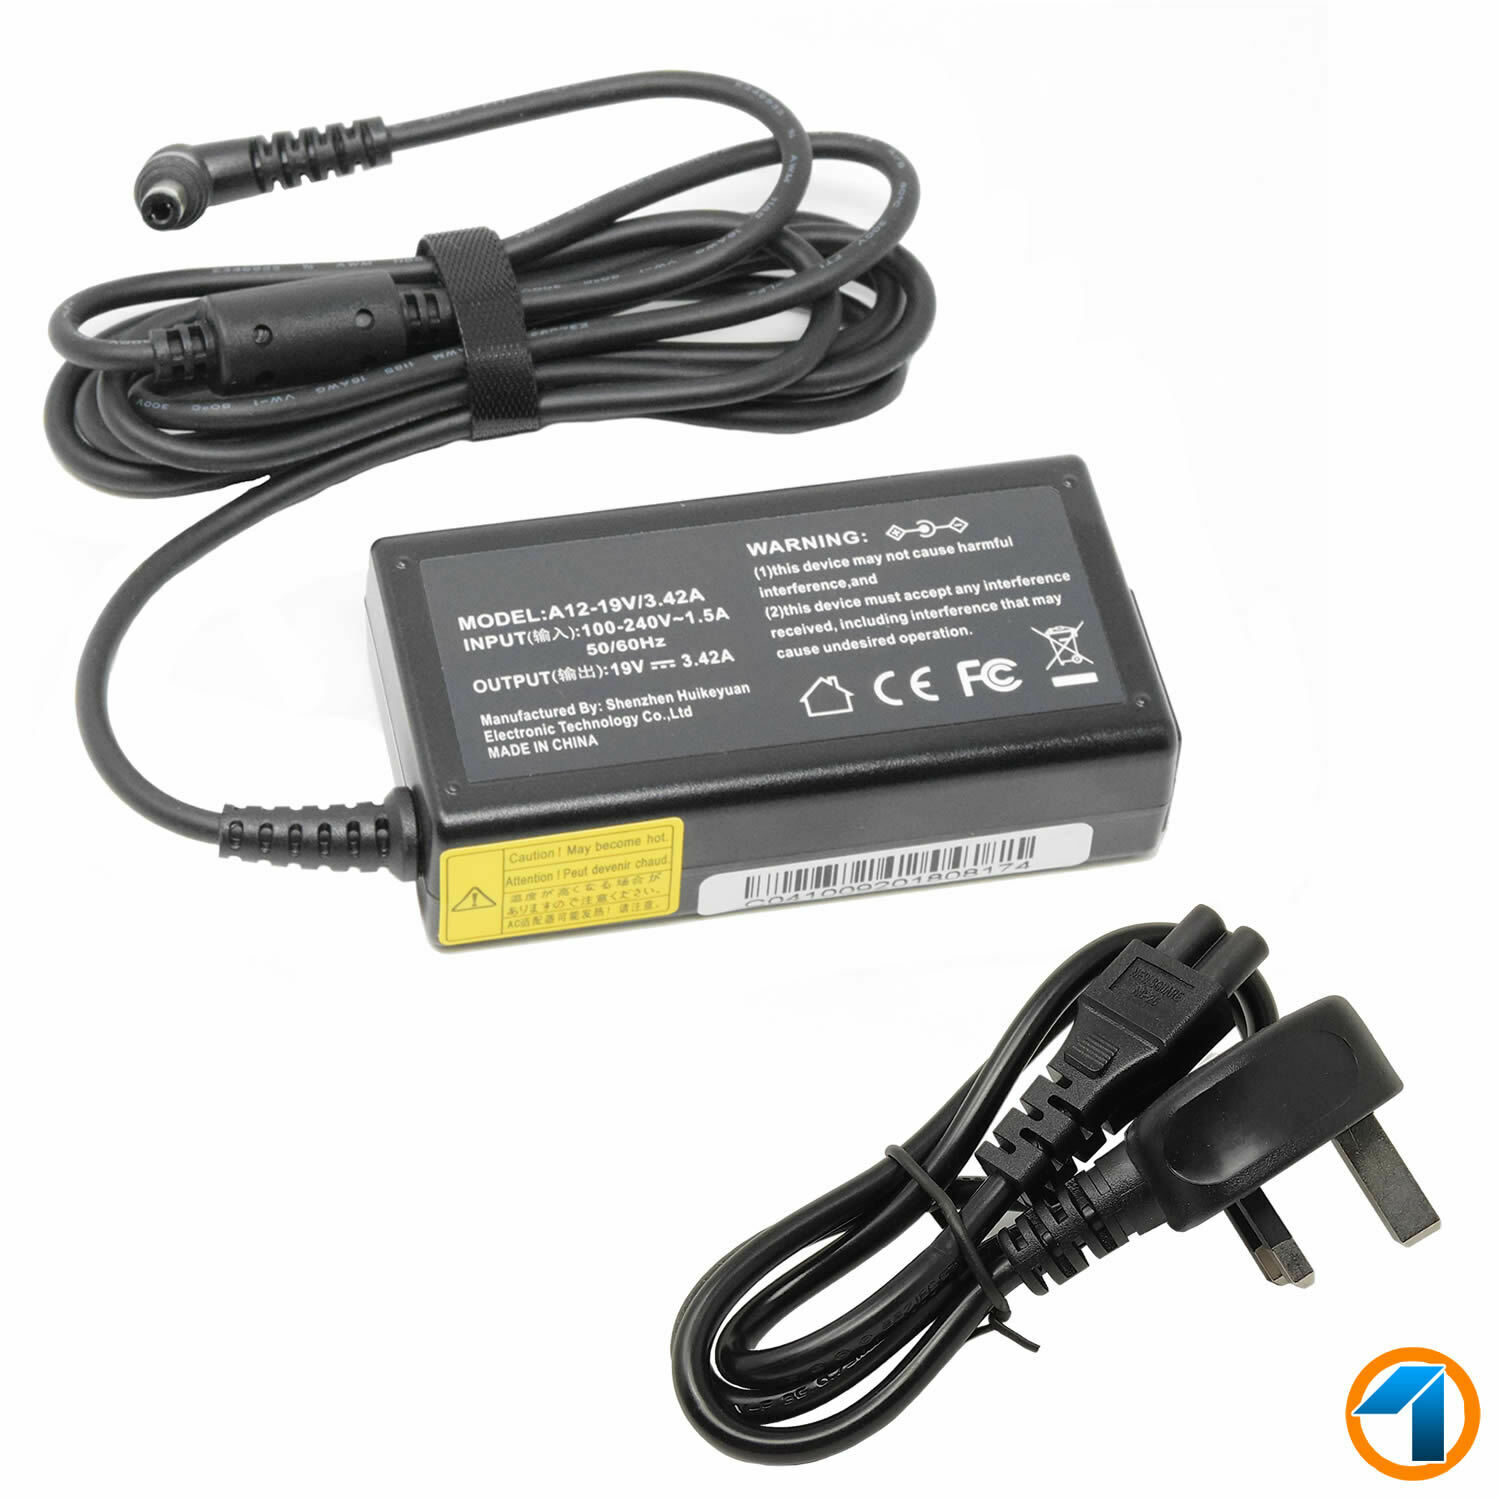 ASUS X555L 65W LAPTOP AC ADAPTER CHARGER POWER SUPPLY NEW Output AMP/Current: 3.42A Max. Output